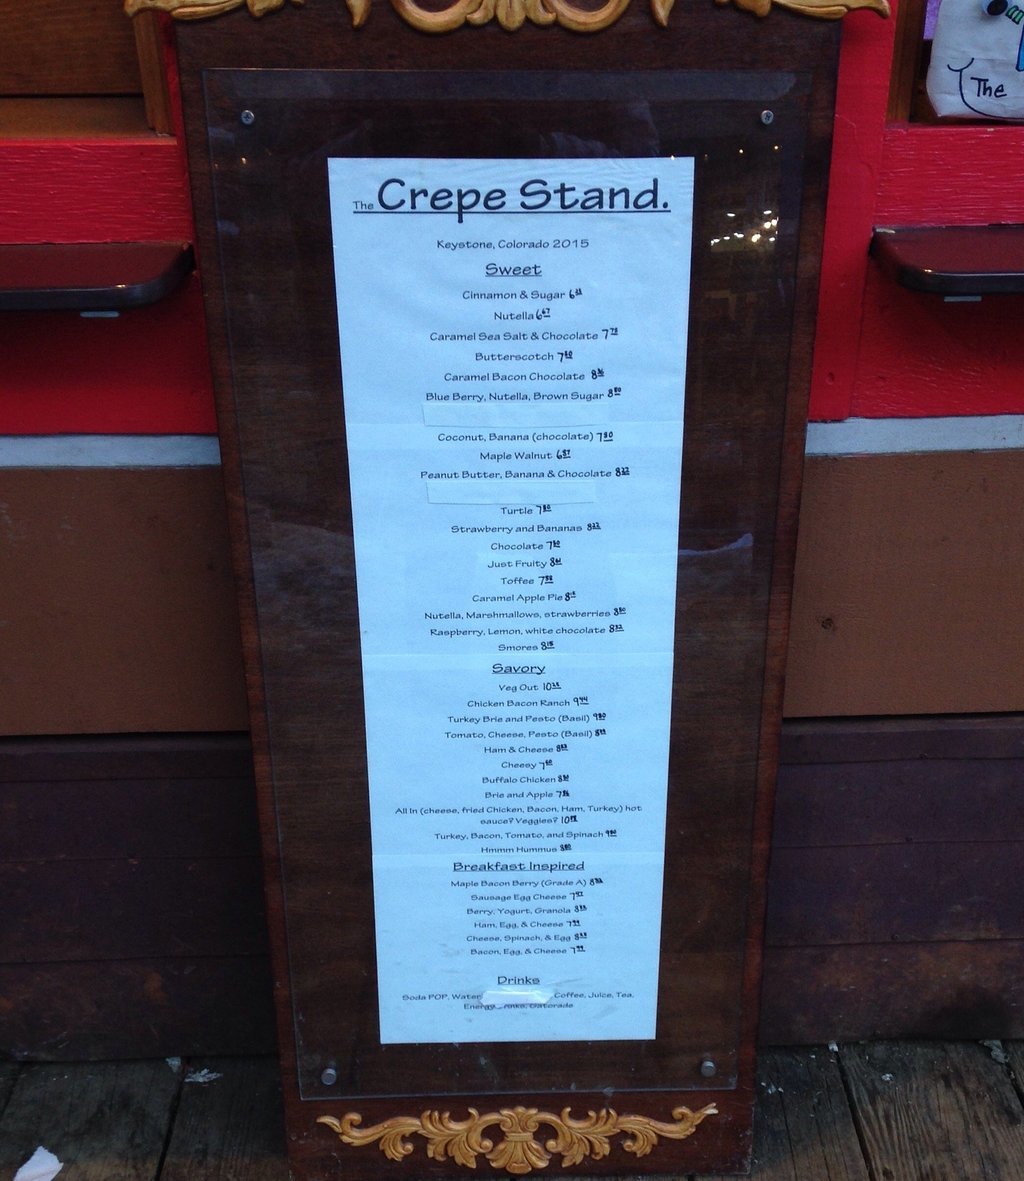 The Crepe Stand